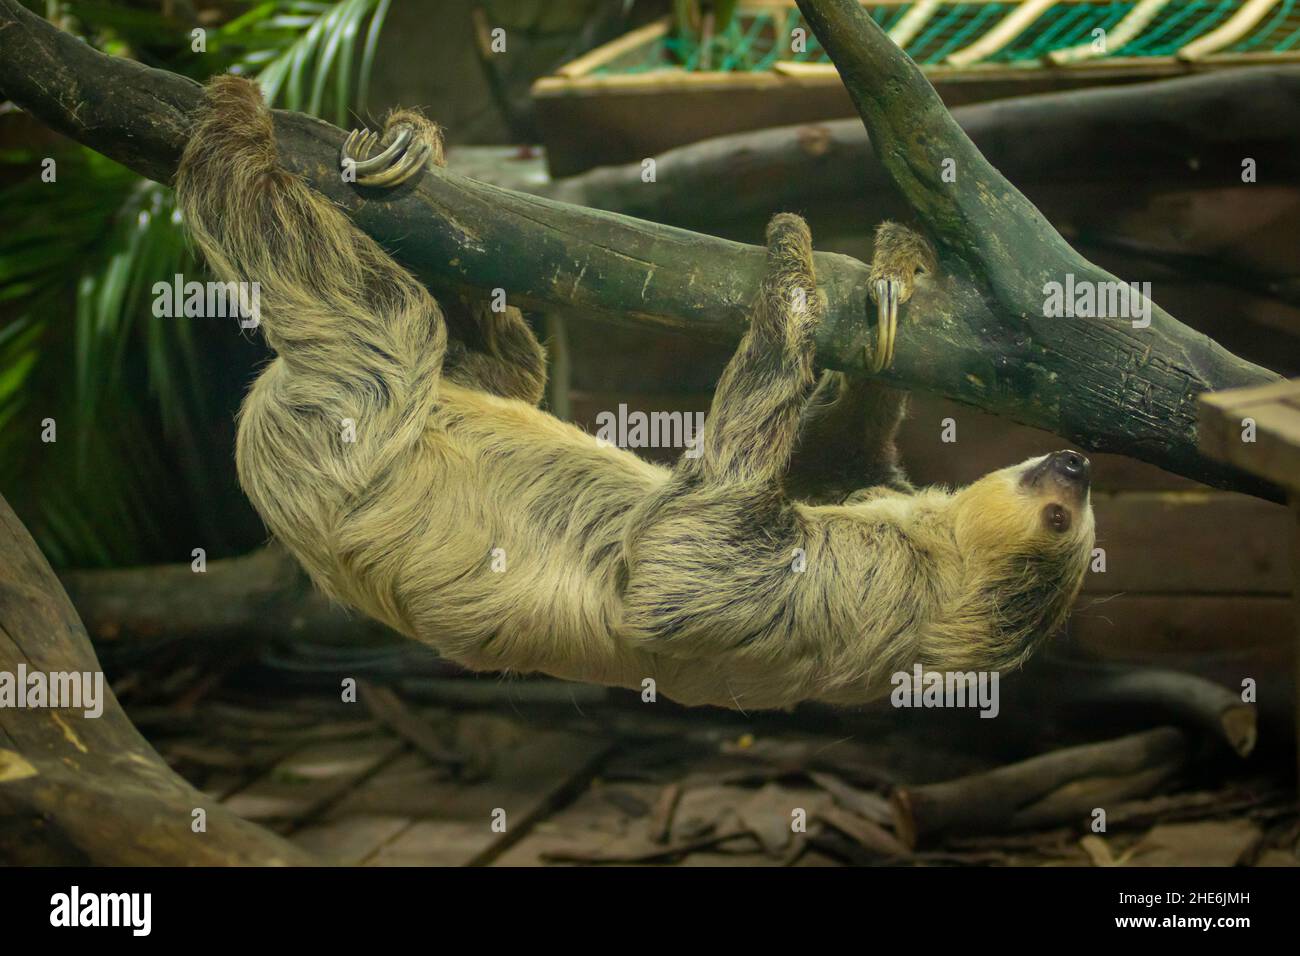 Cute Linnaeus's two-toed sloth sleeping while hanging on a tree branch Stock Photo